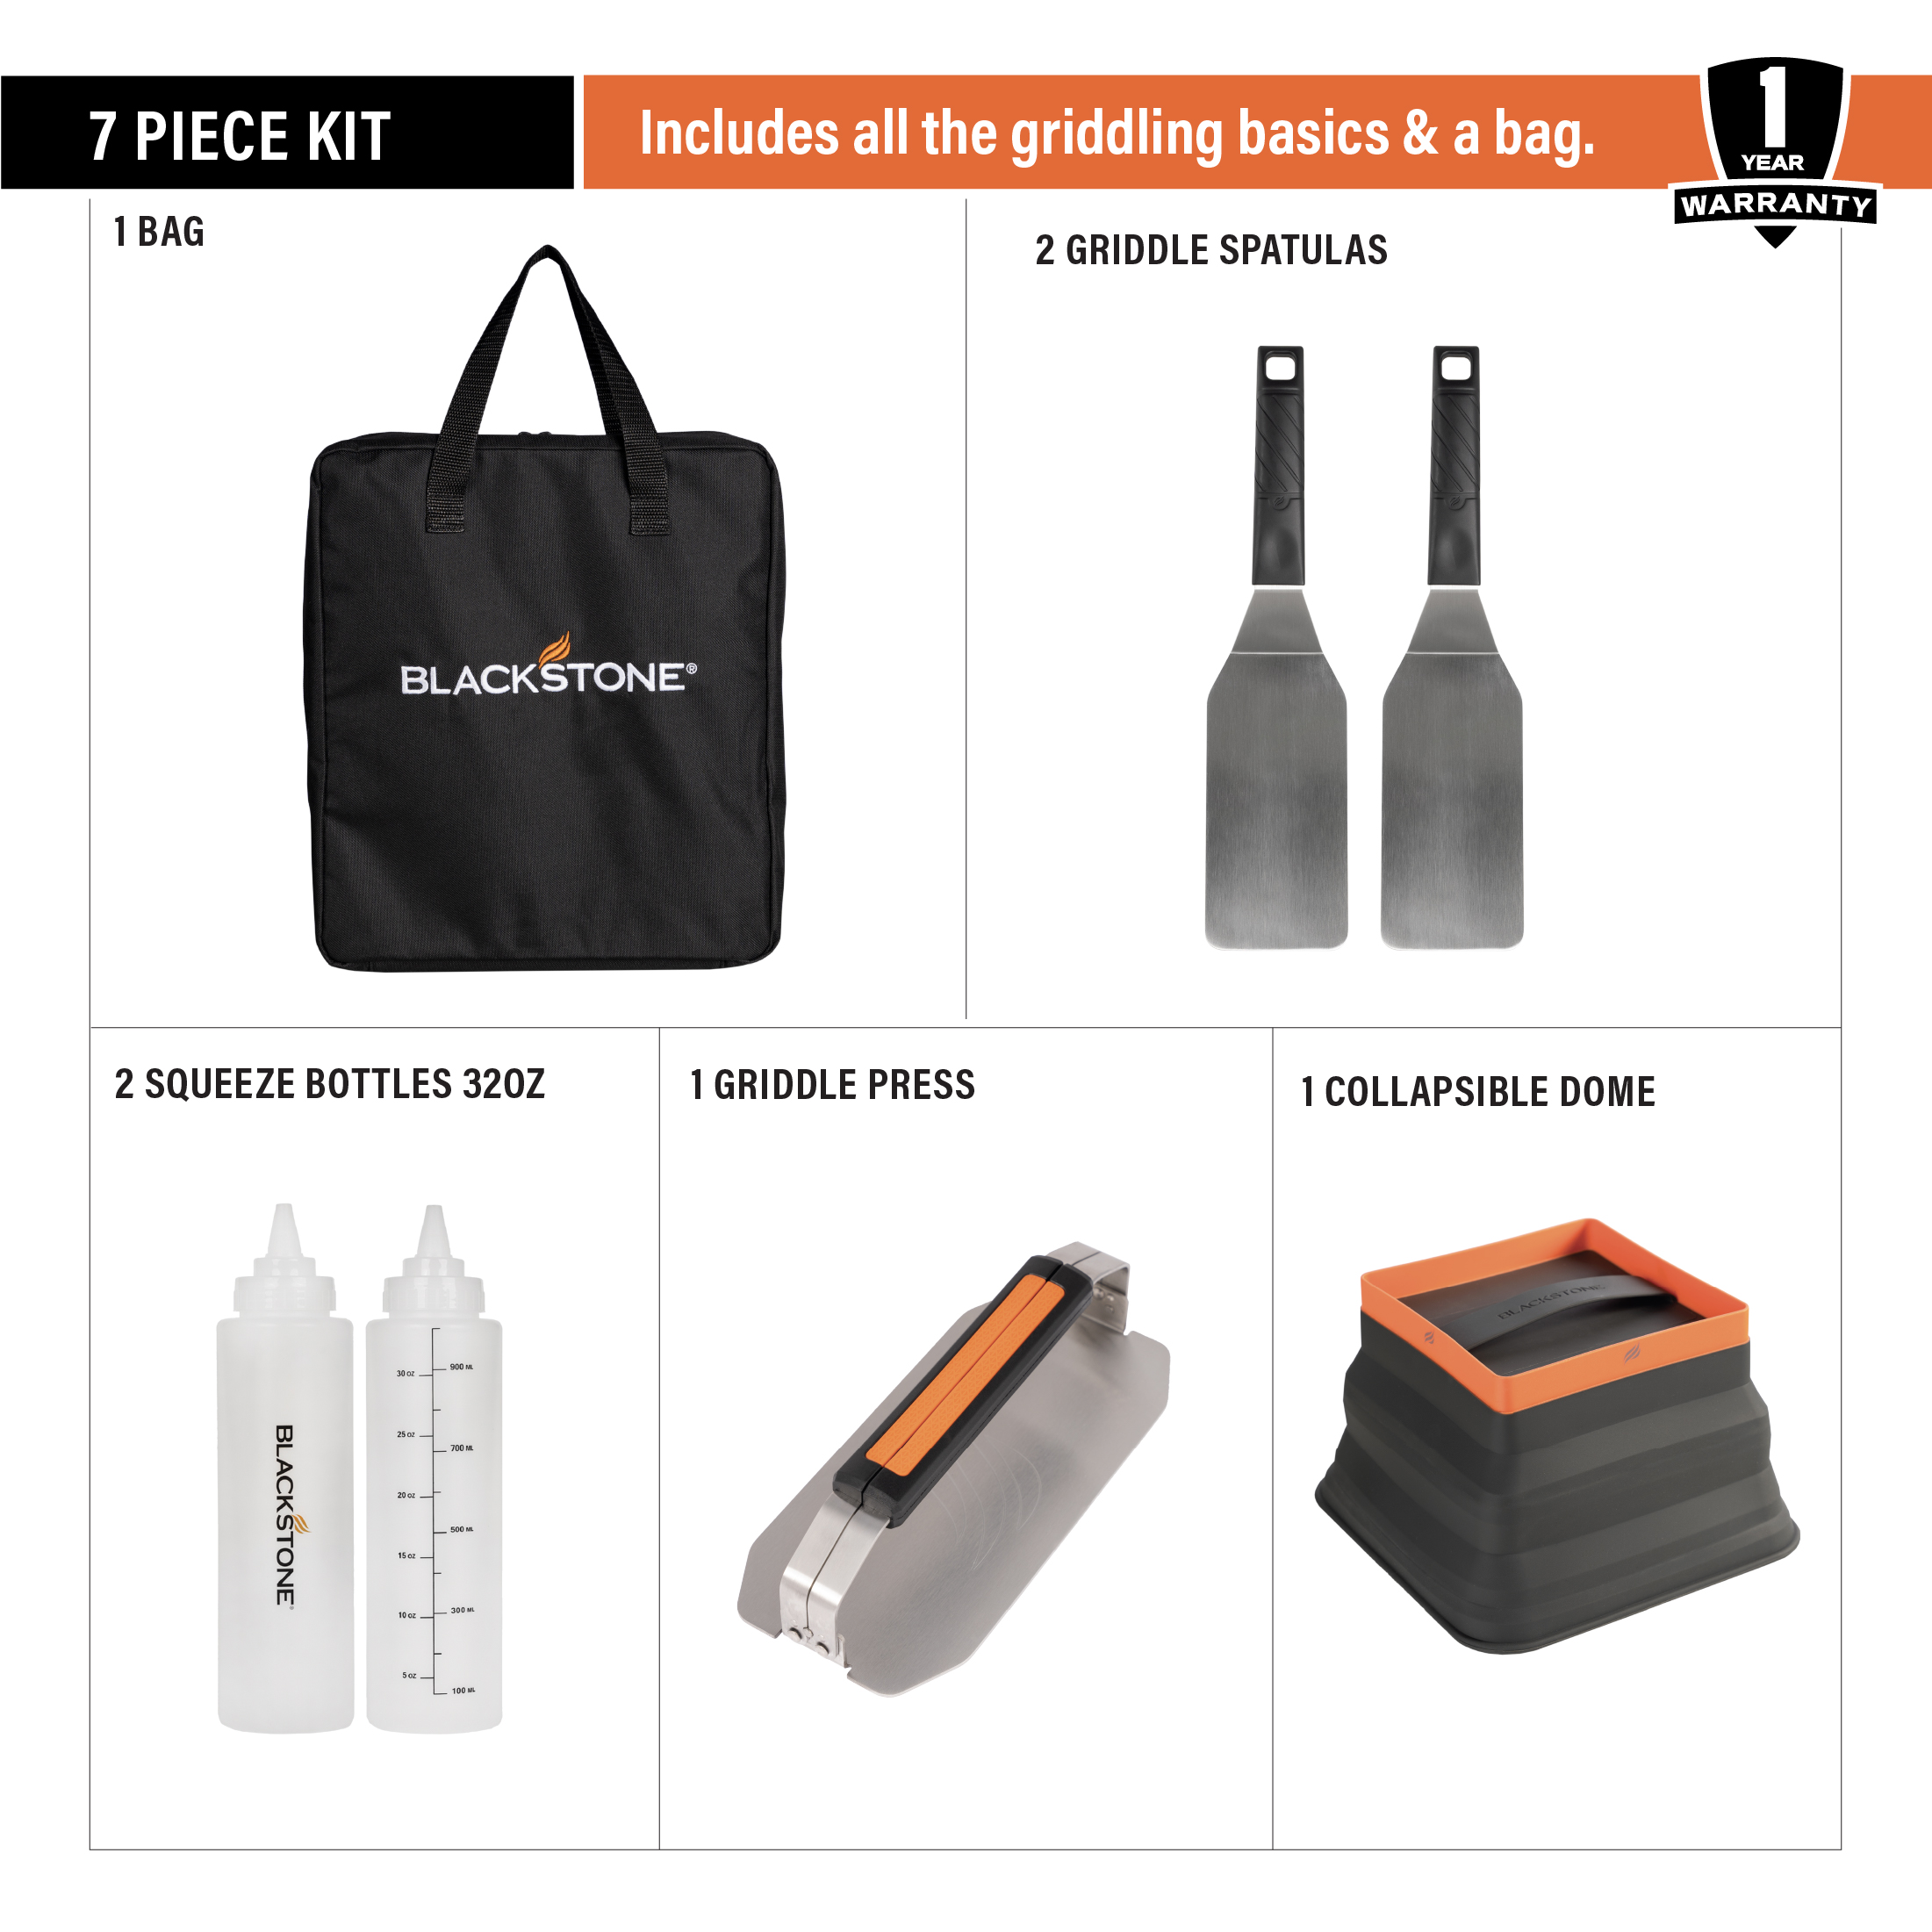 Blackstone Adventure Ready 7 Piece Griddle Tool Kit Gift Set with Bag - image 4 of 13